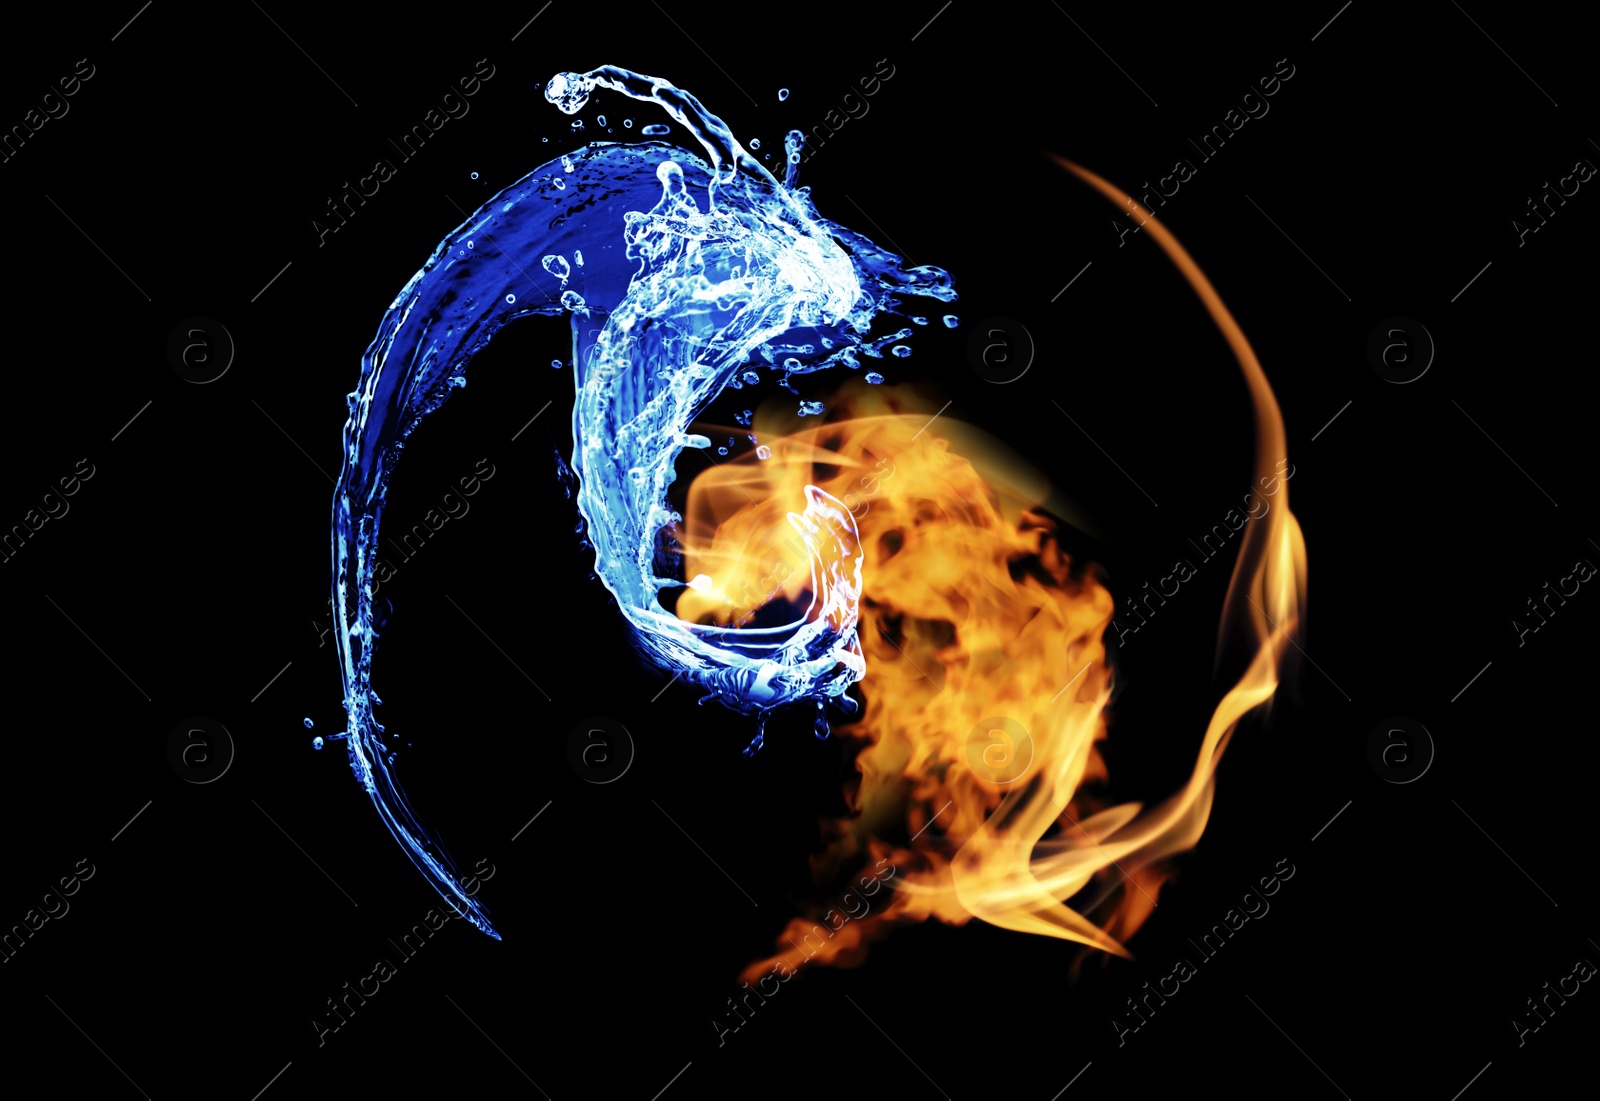 Image of Fire flames and water splashes resembling Yin Yang symbol on black background. Feng Shui philosophy